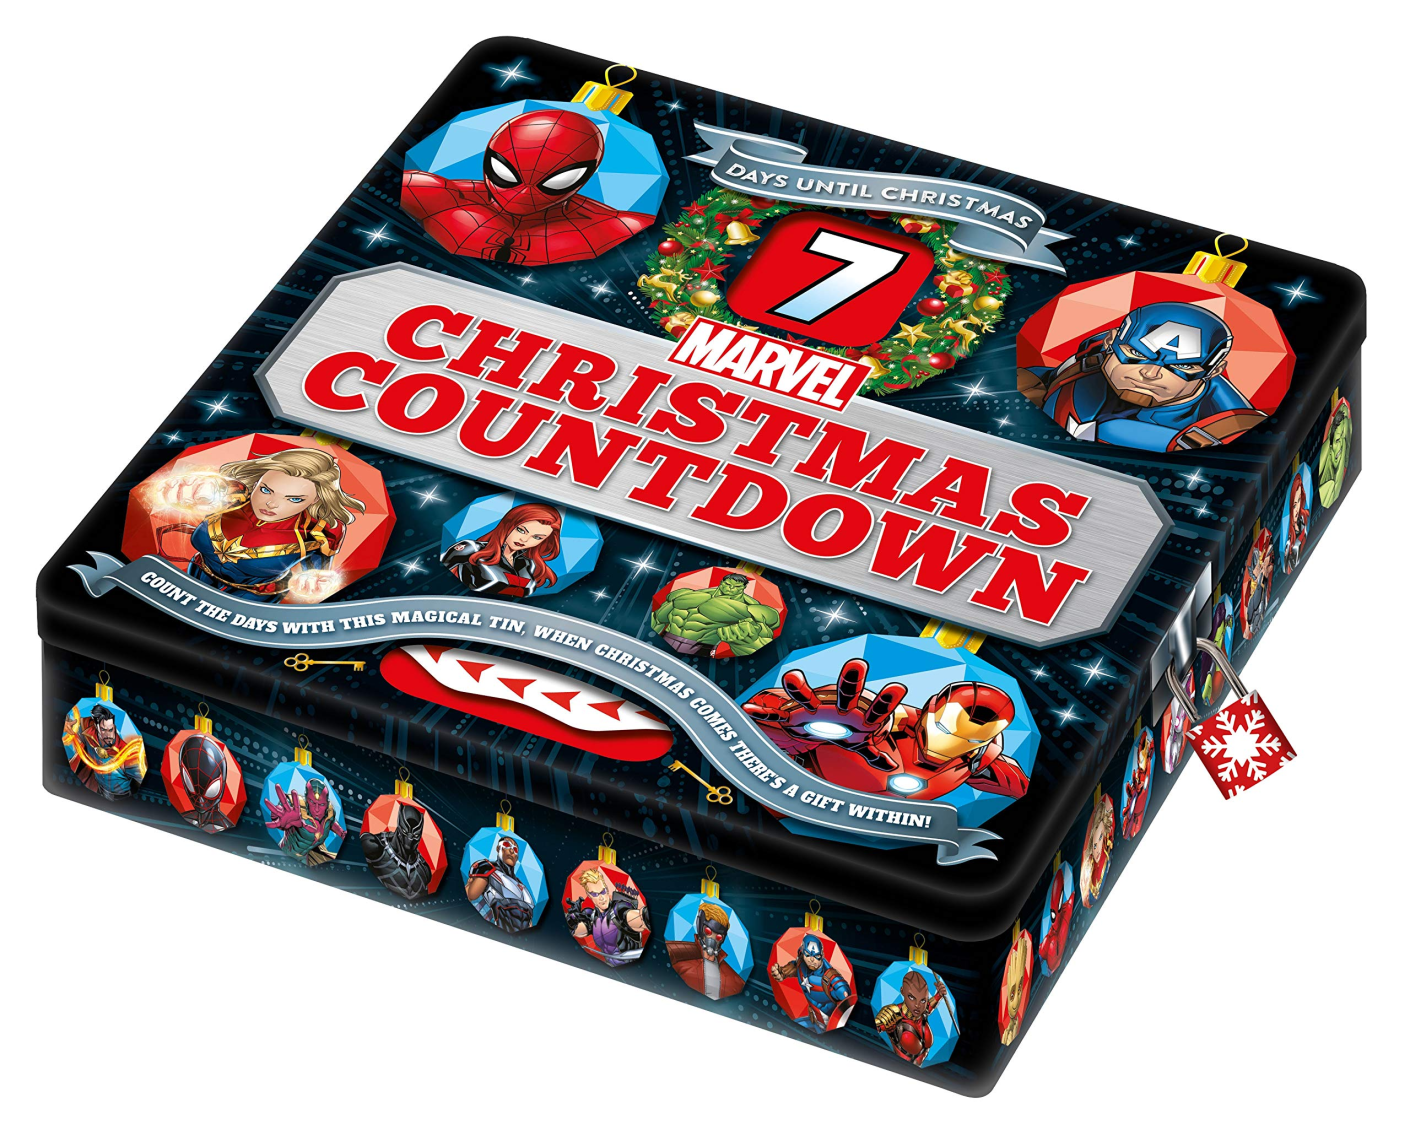 Marvel Storybook Advent Calendar Reviews: Get All The Details At Hello